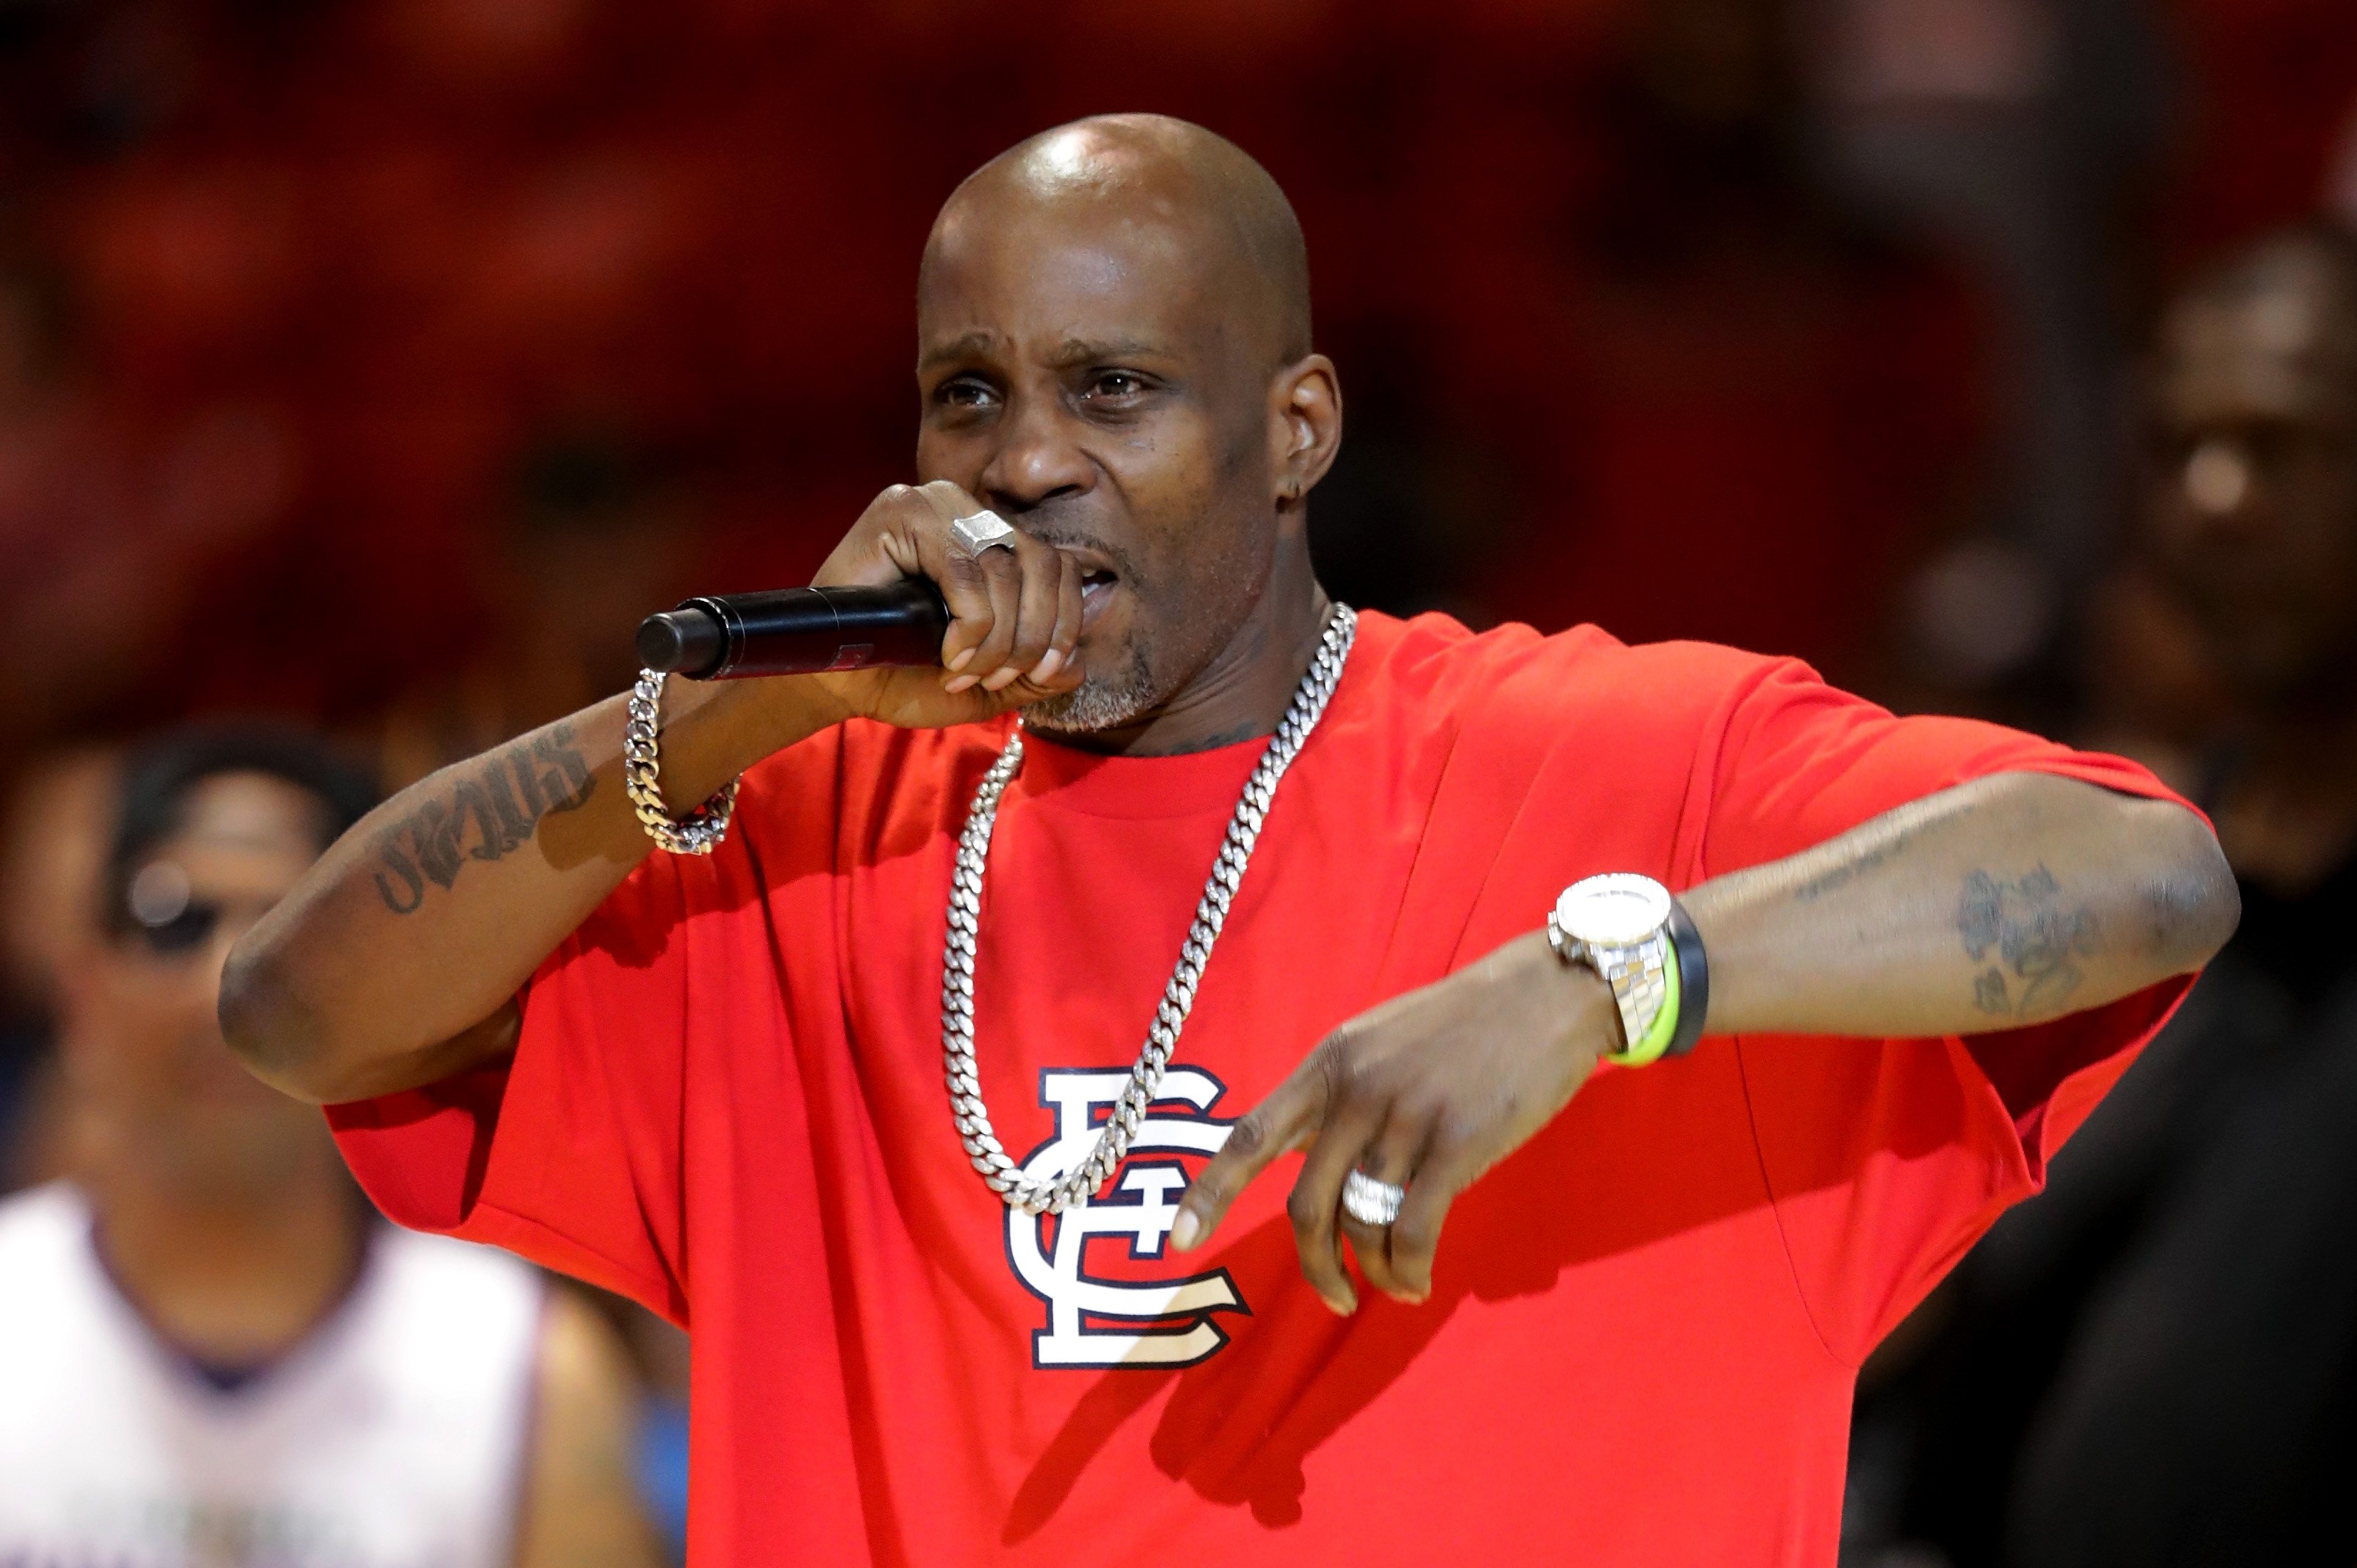 Rapper DMX performs during week five of the BIG3 three on three basketball league at UIC Pavilion on July 23, 2017 | Photo: Getty Images